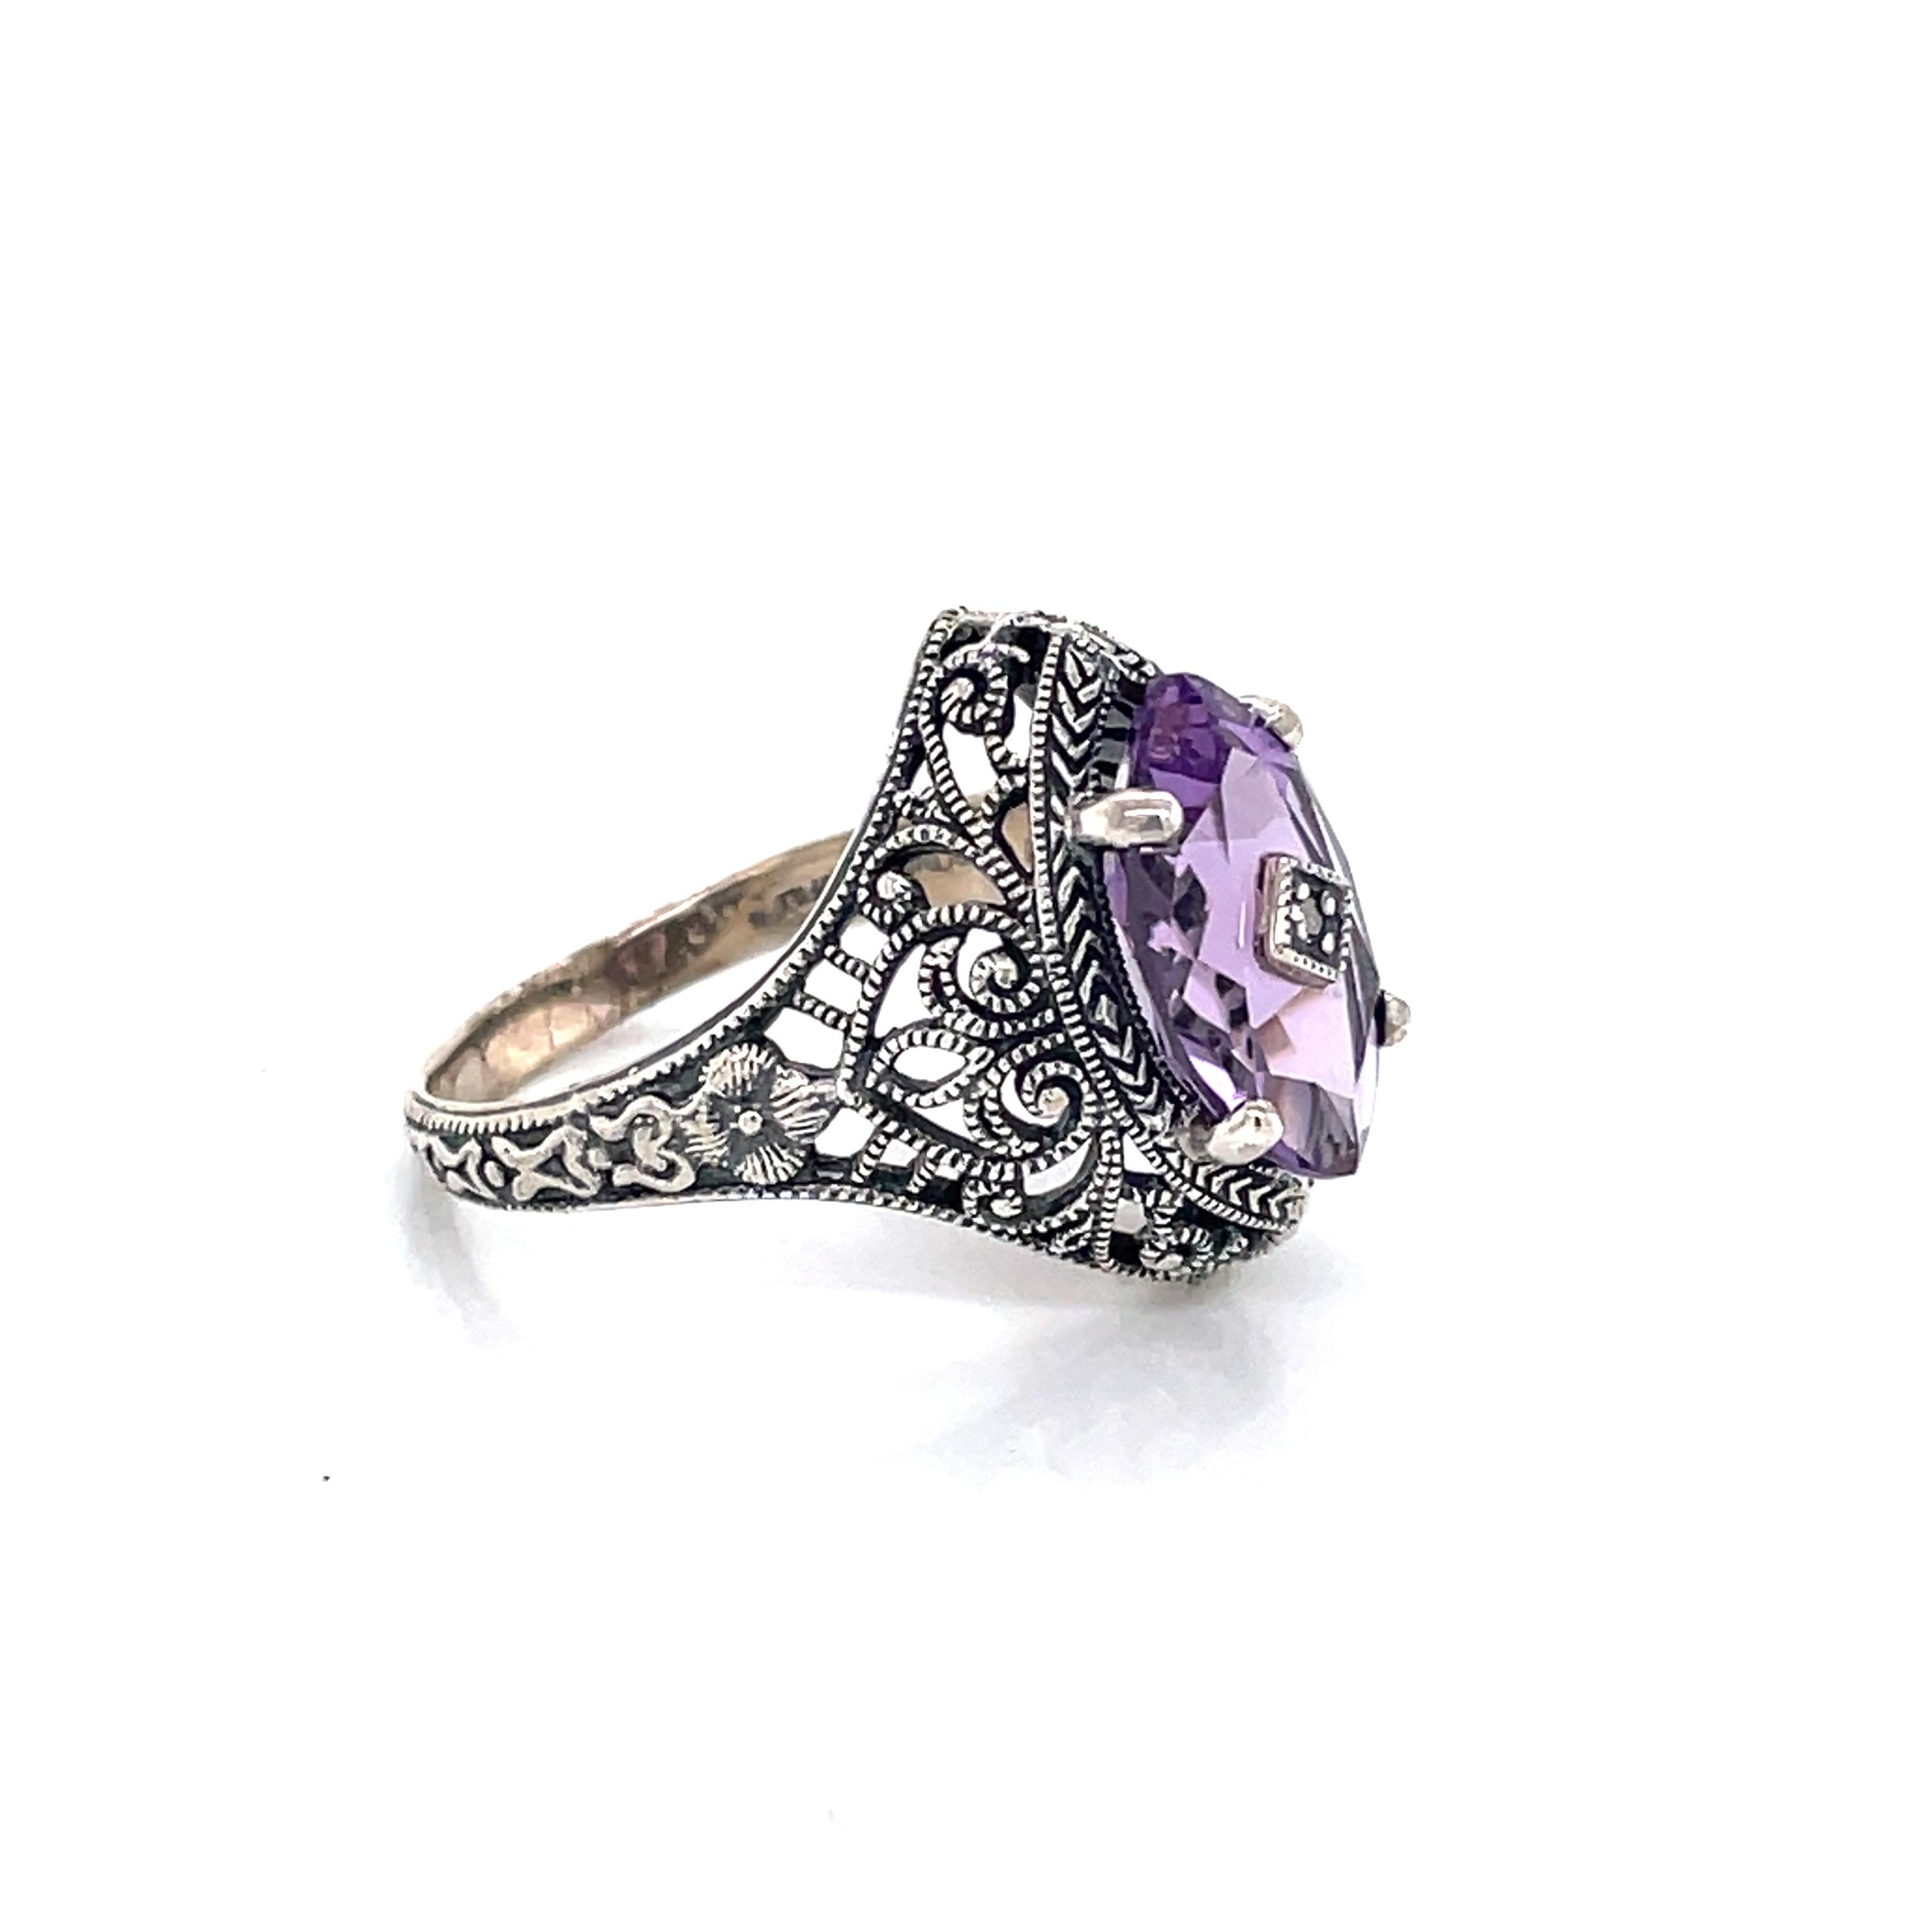 Oval Cut Amethyst Diamond Victorian Style Sterling Silver Filigree Ring w Diamond Accent